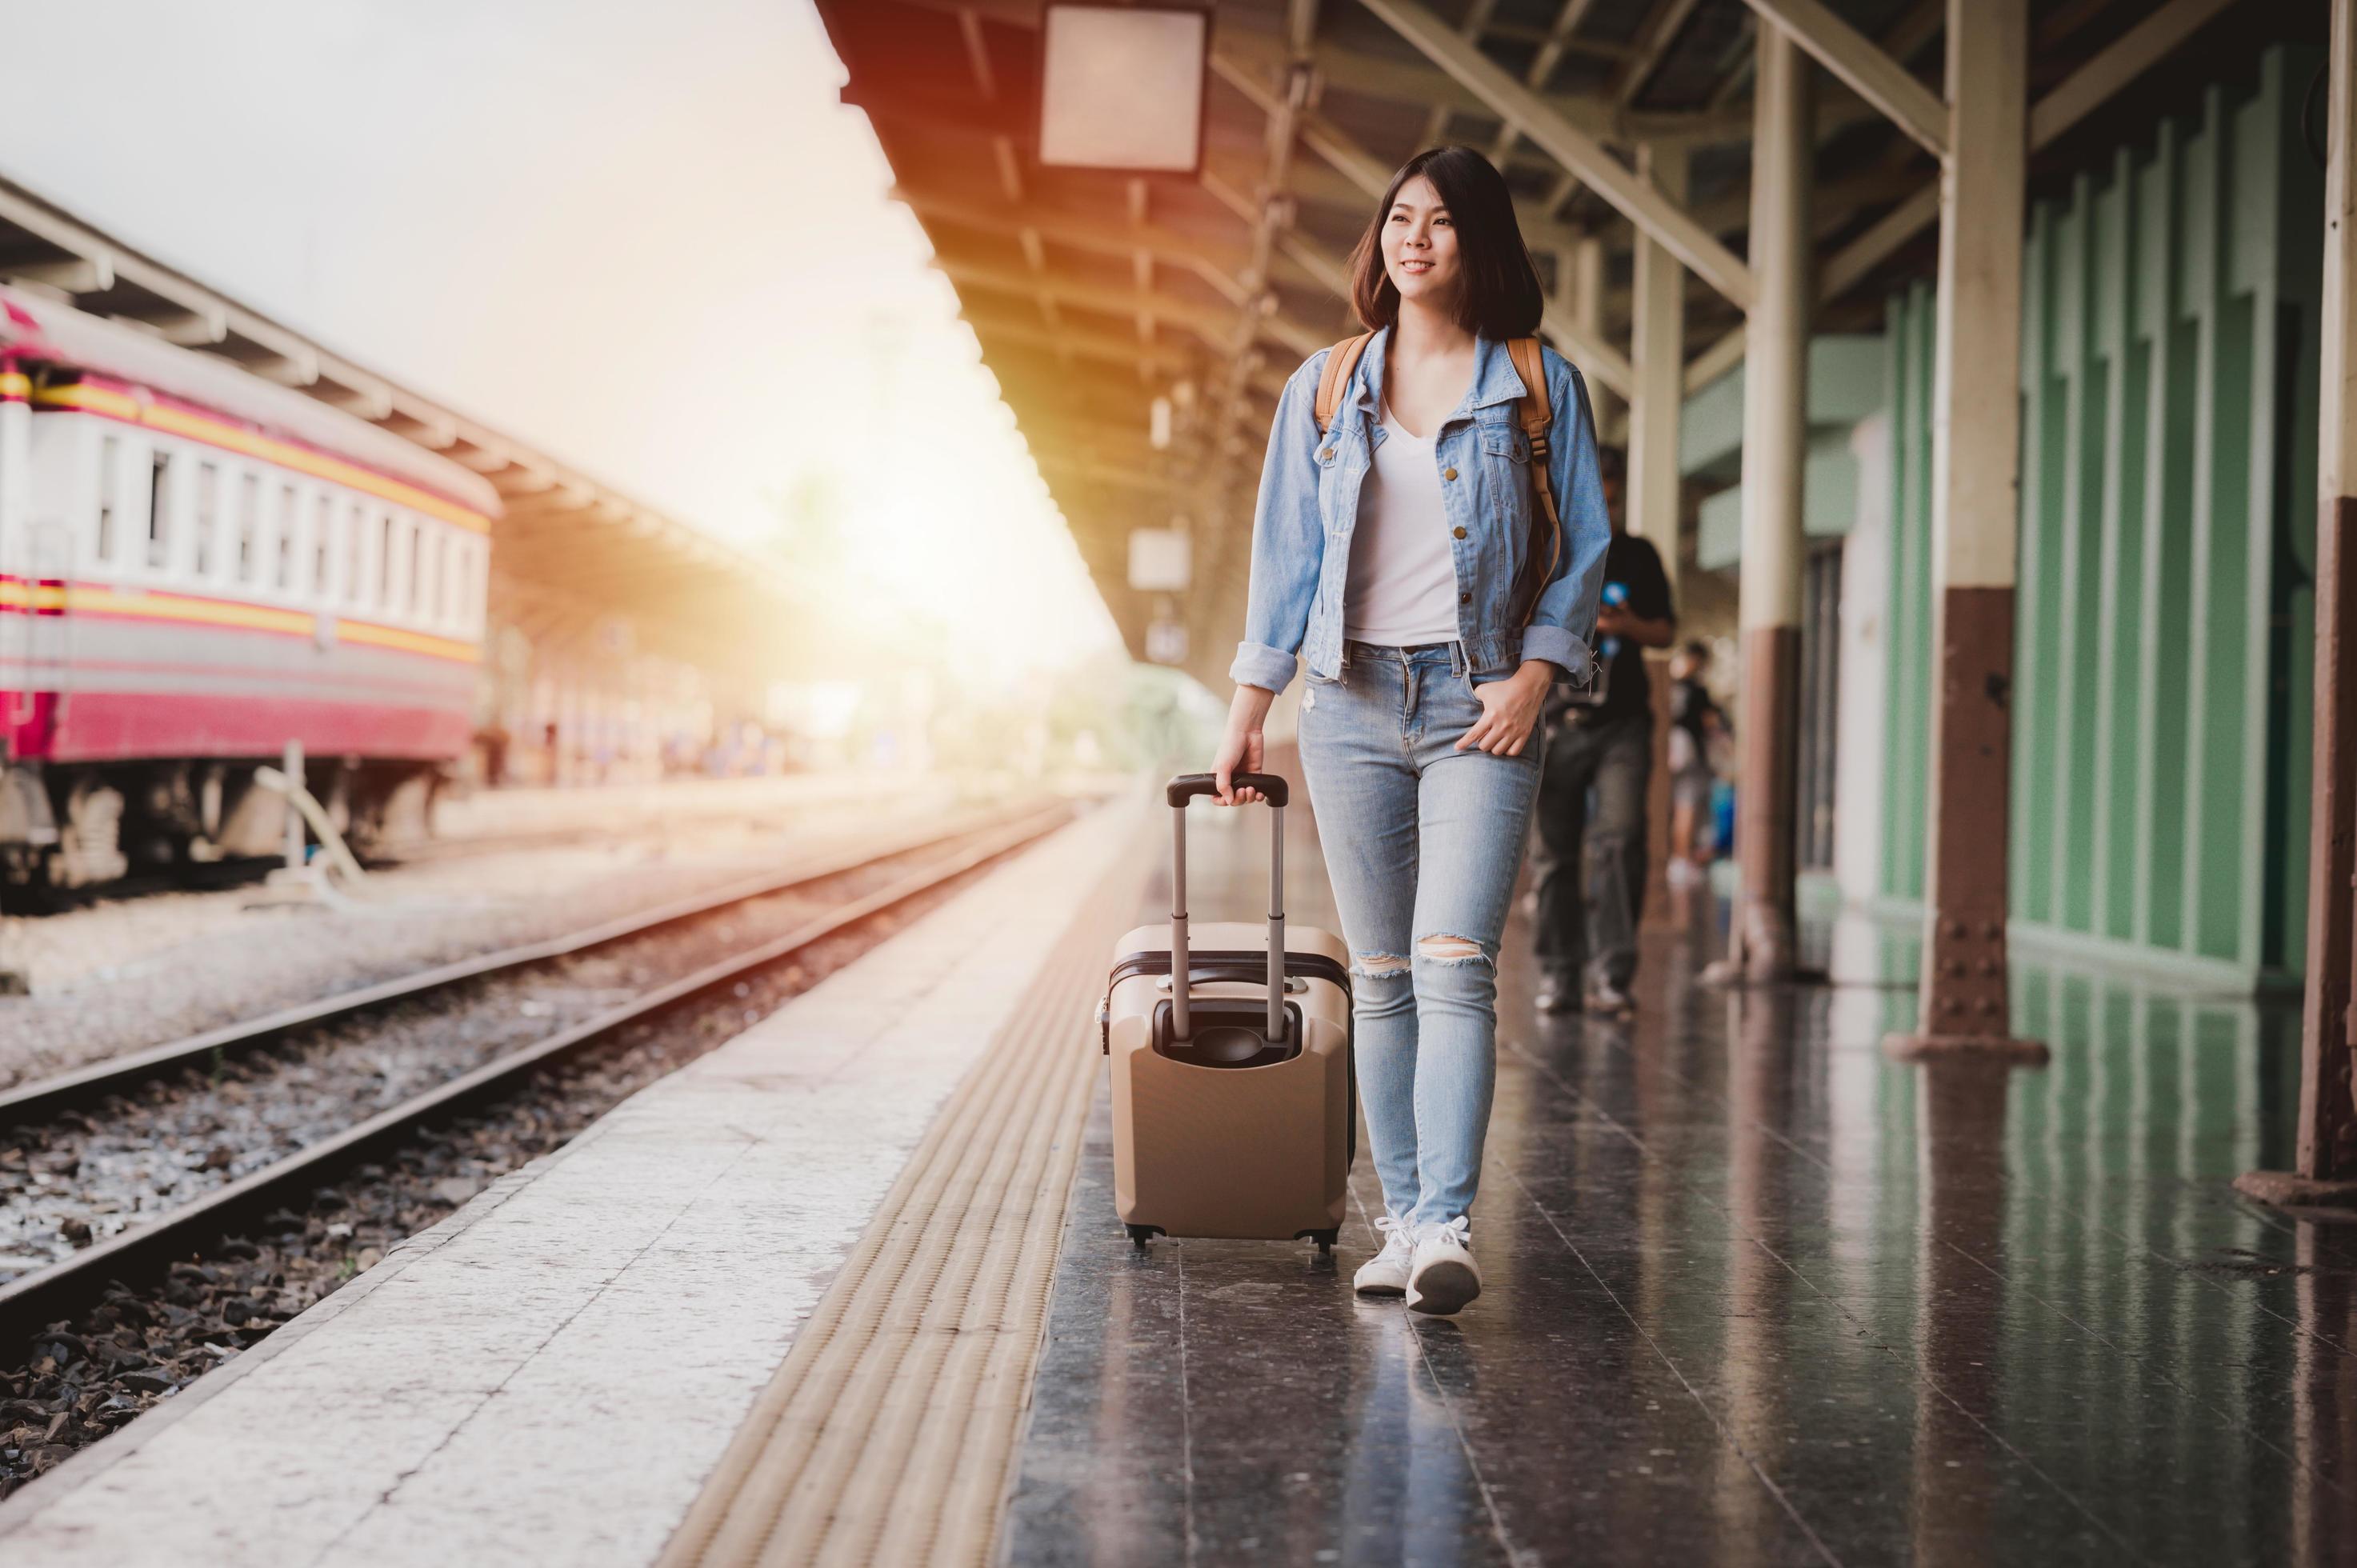 Woman with luggage at train station 1223400 Stock Photo at Vecteezy